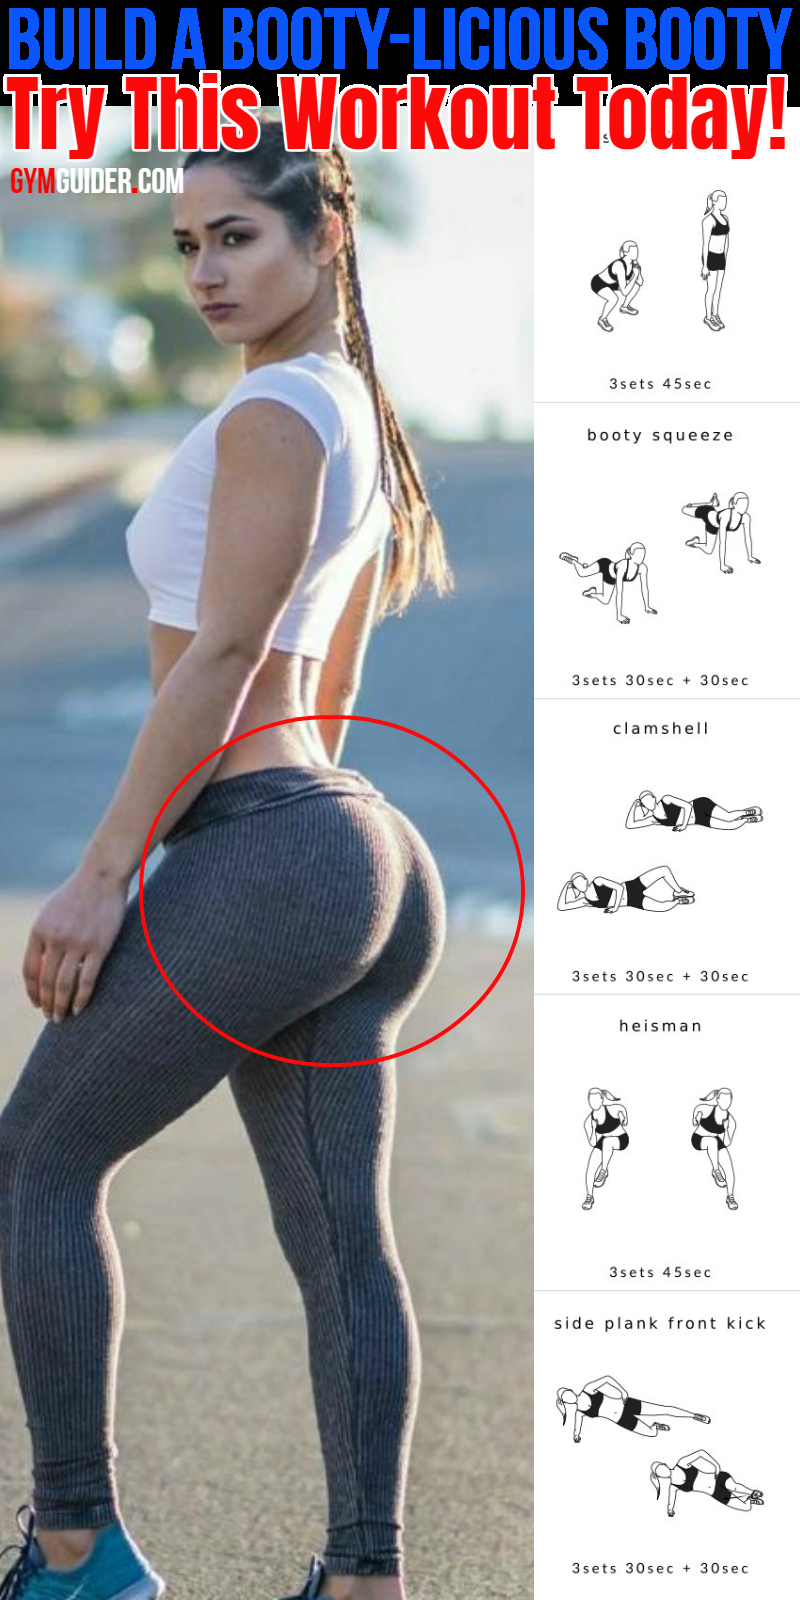 Womens Workout, Build Your Booty, Lose Fat, Can Be Done At Home Or The Gym Using A Dumbbar - Womens Workout, Build Your Booty, Lose Fat, Can Be Done At Home Or The Gym Using A Dumbbar -   13 workouts for bigger but at home ideas